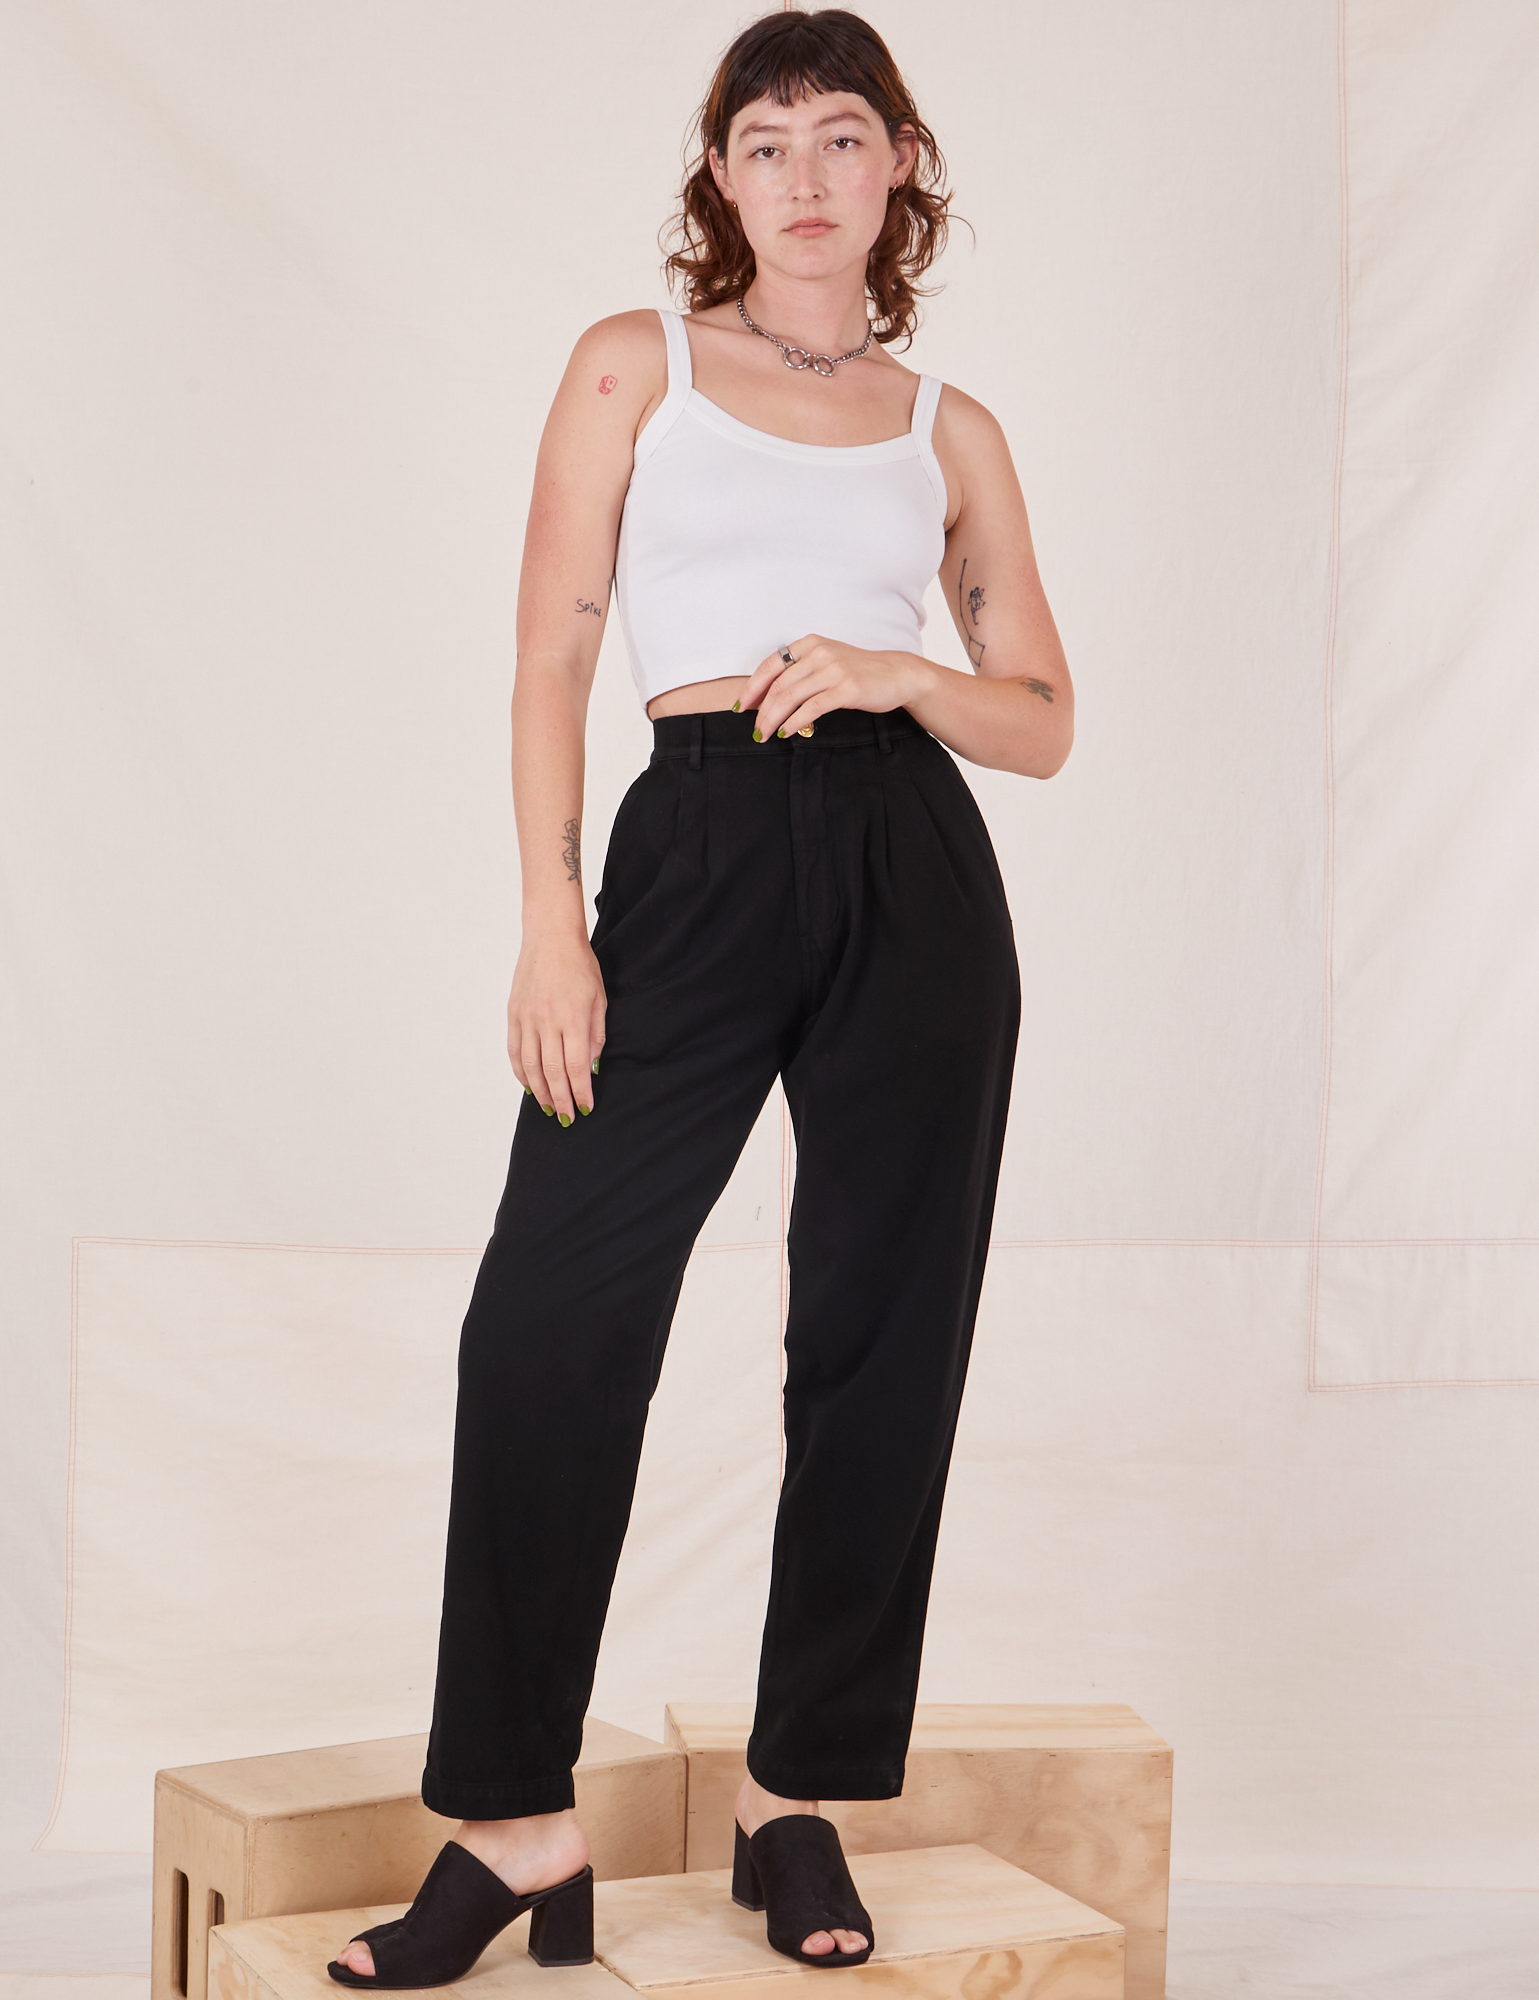 Alex is 5&#39;8&quot; and wearing XXS Organic Trousers in Basic Black paired with vintage off-white Cropped Cami